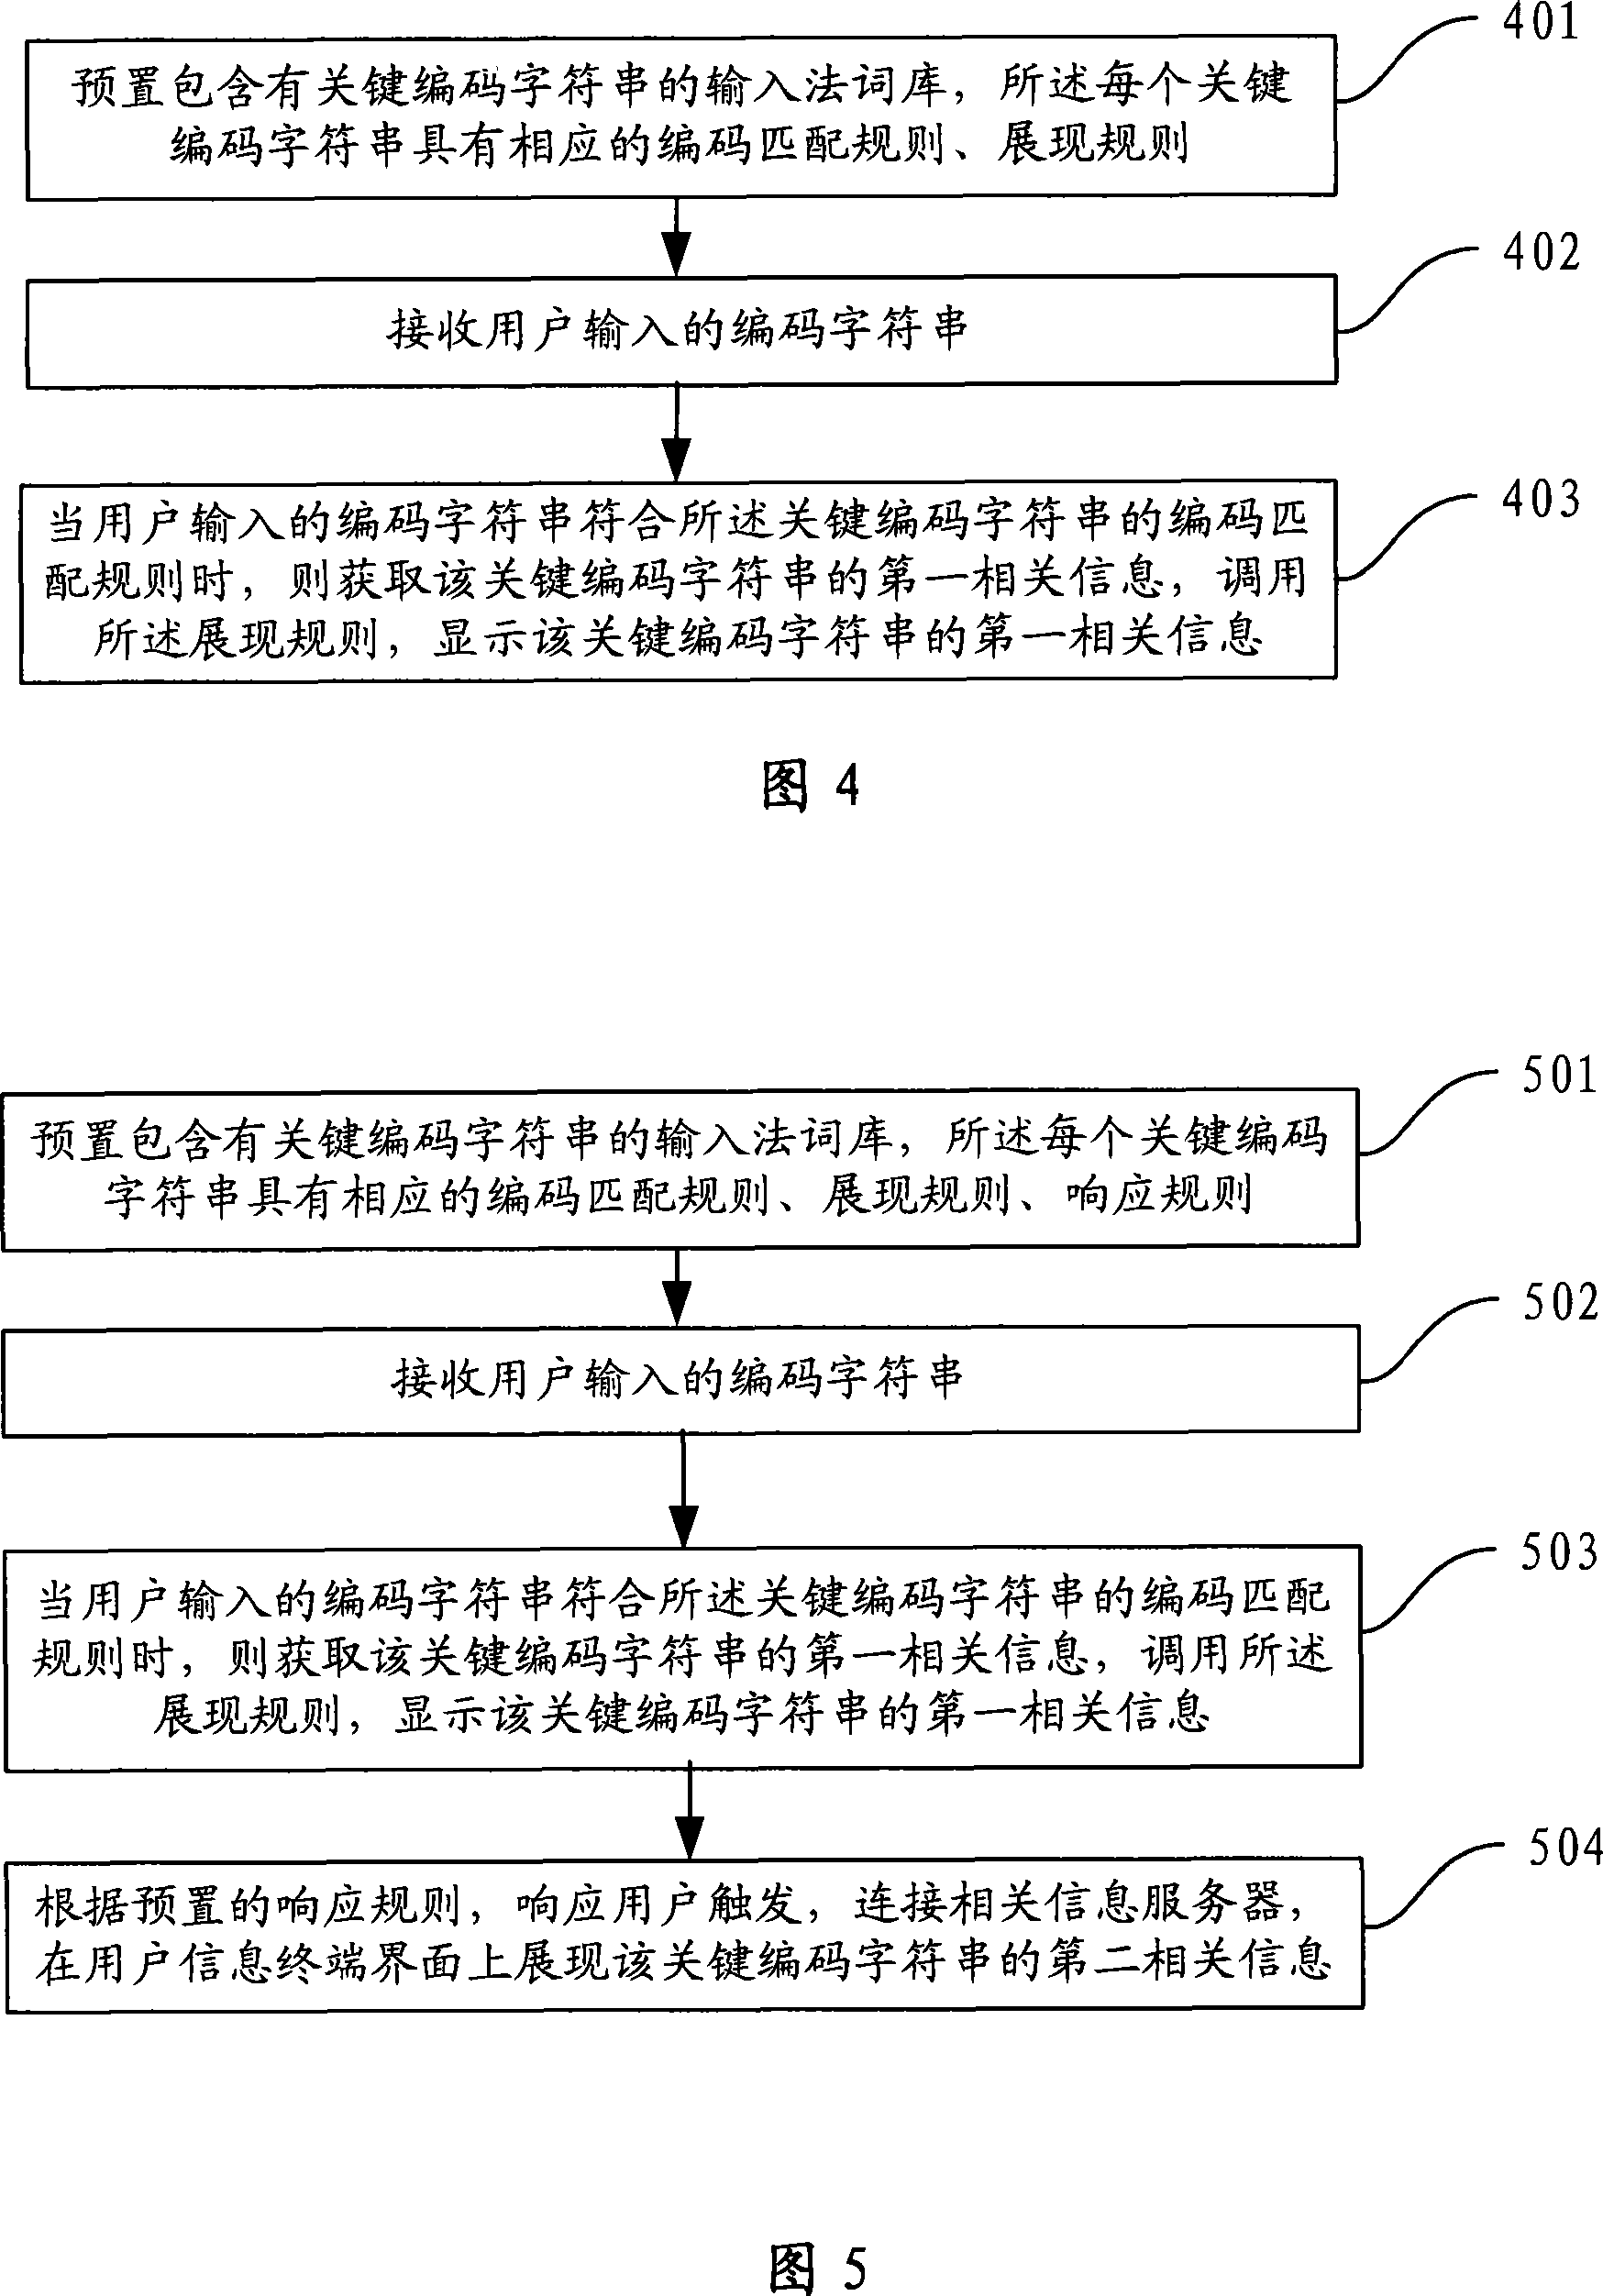 Method and system for publishing information related to internet key character